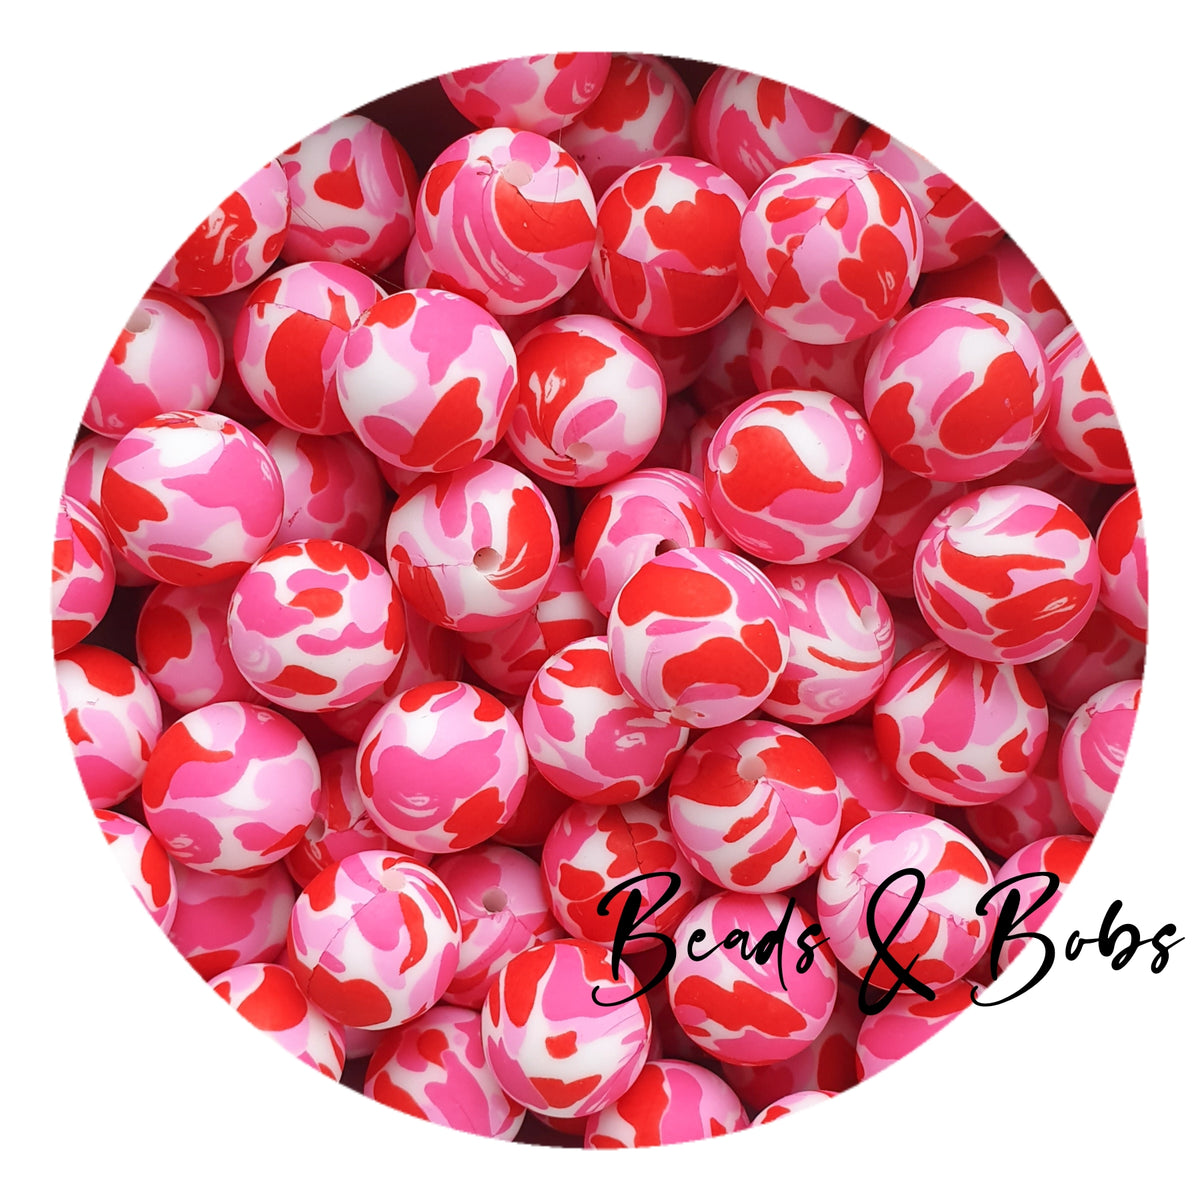 280Piece 15Mm Silicone Beads 30 Mixed Silicone Beads Bulk Round